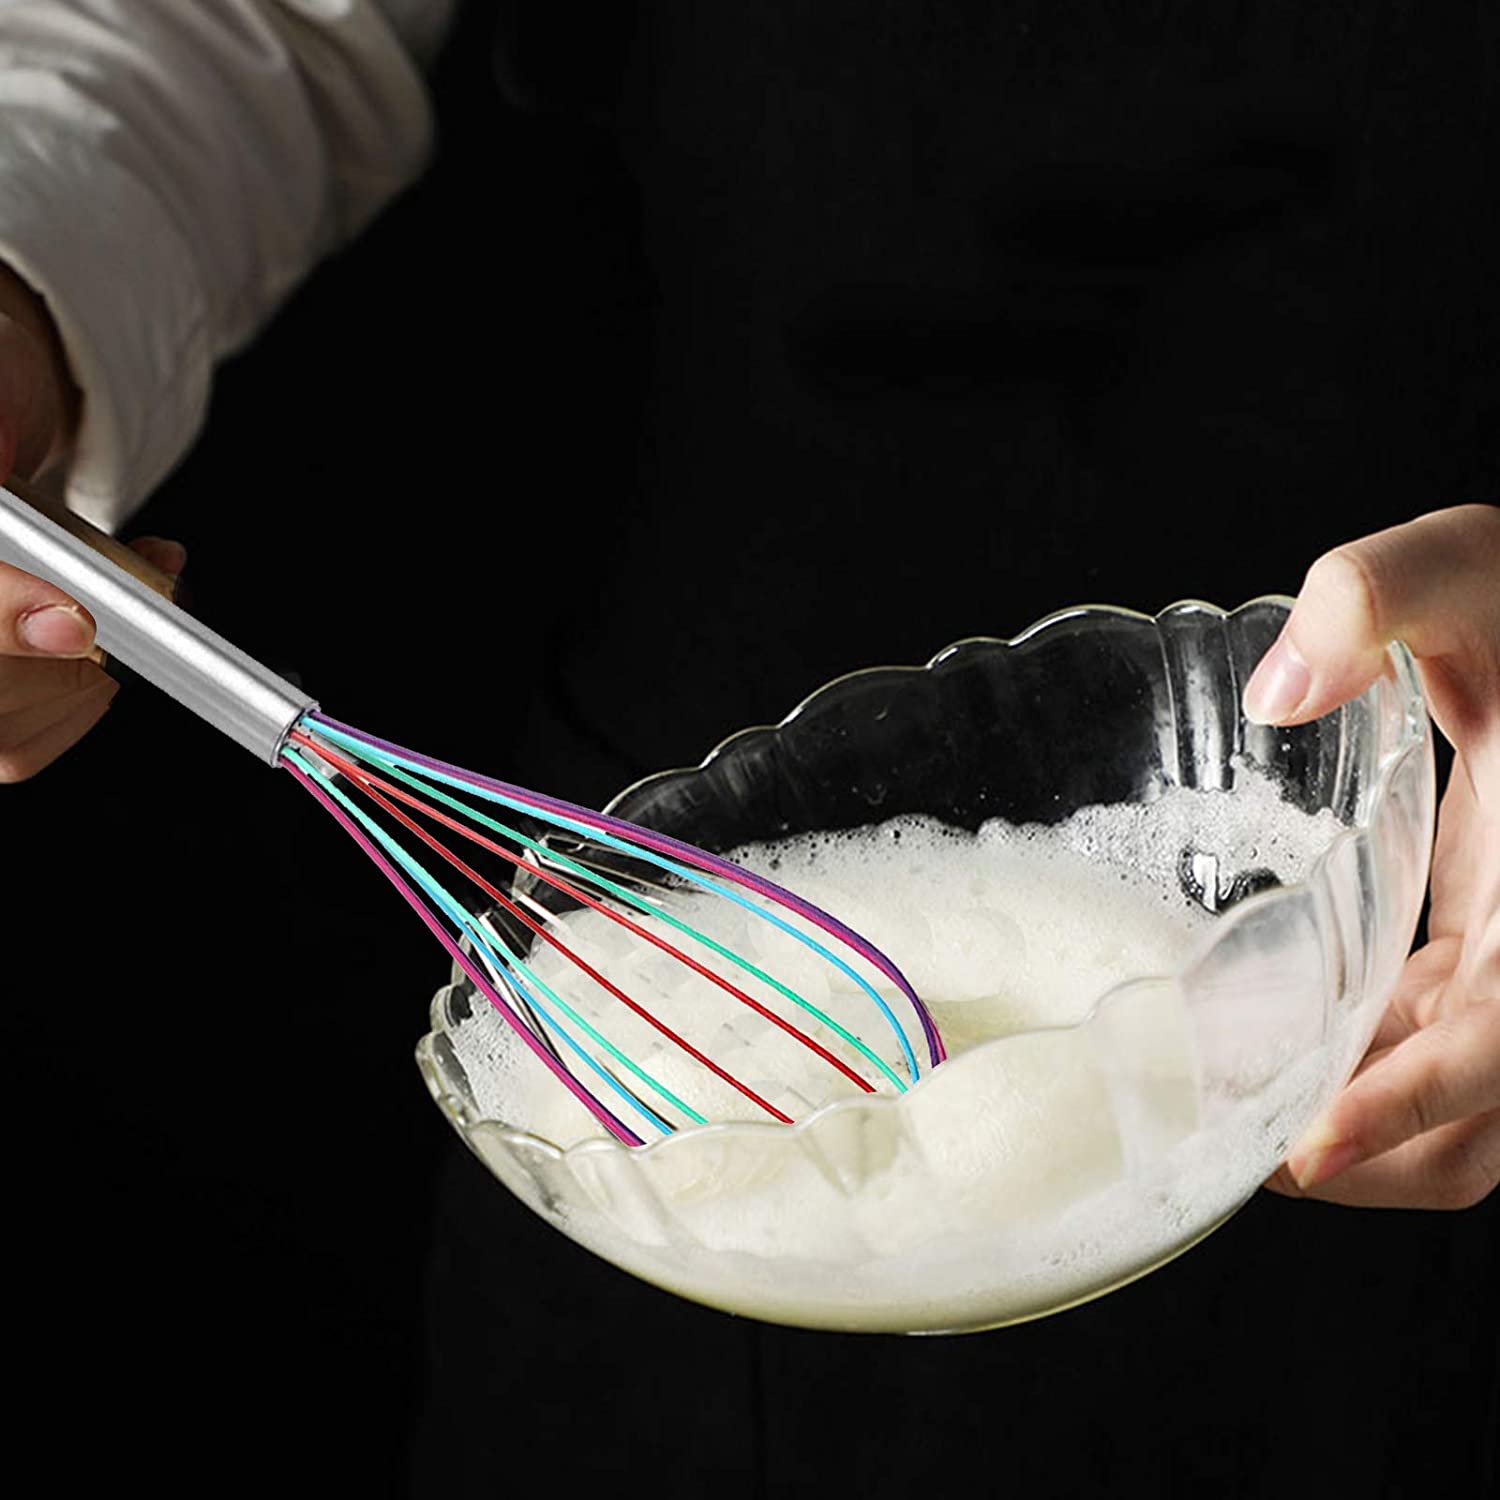 Whisk being used to froth milk for desserts